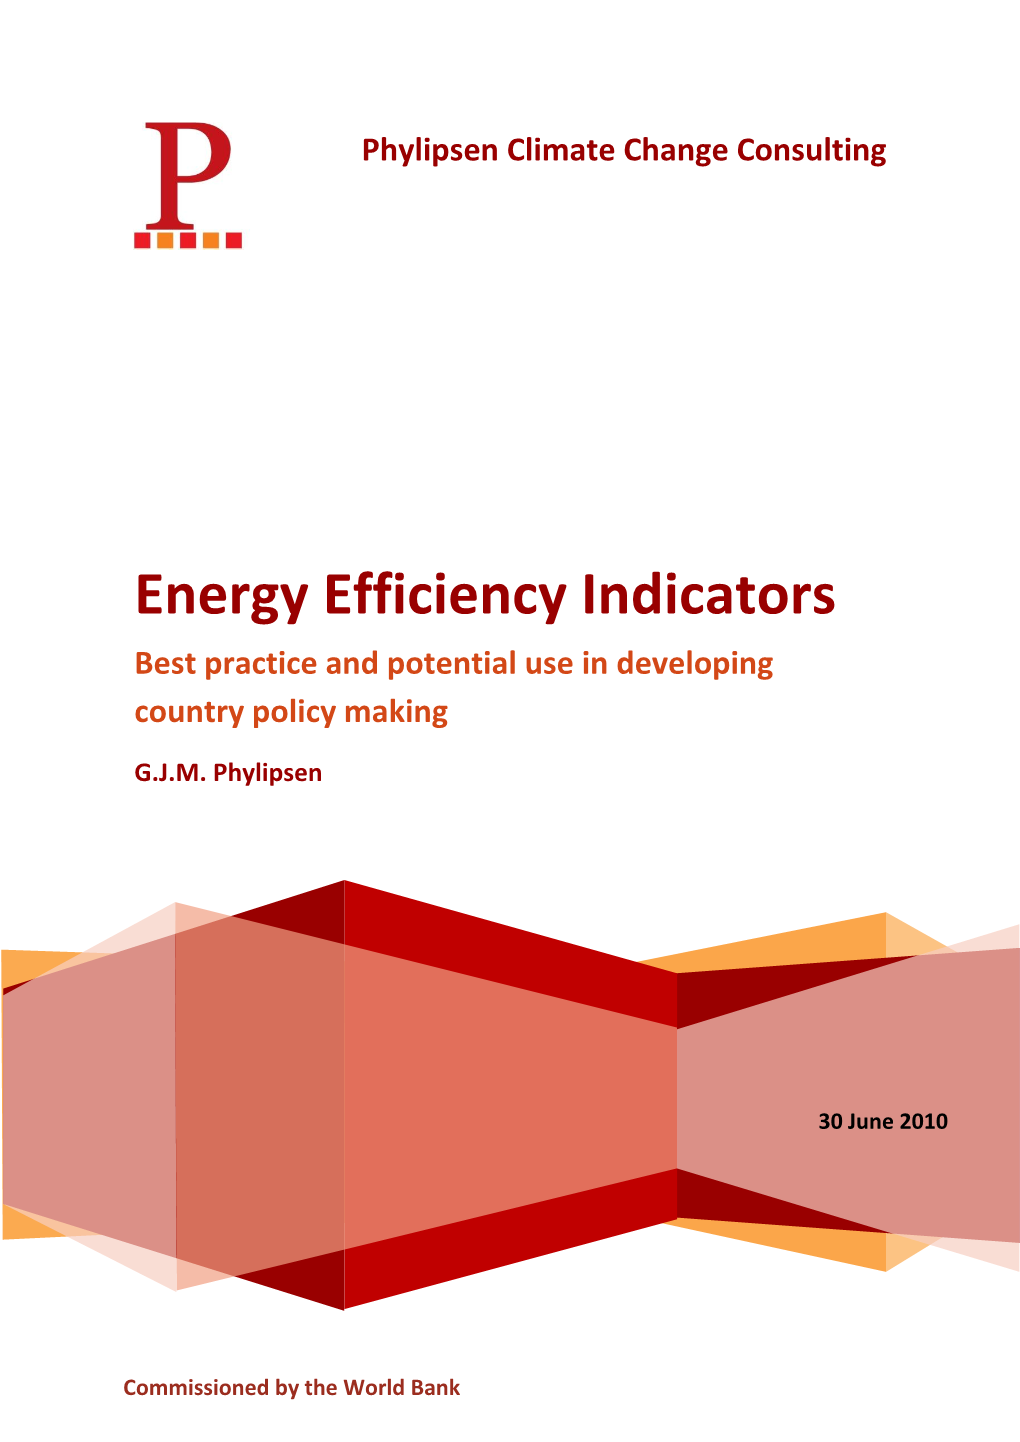 Energy Efficiency Indicators Best Practice and Potential Use in Developing Country Policy Making